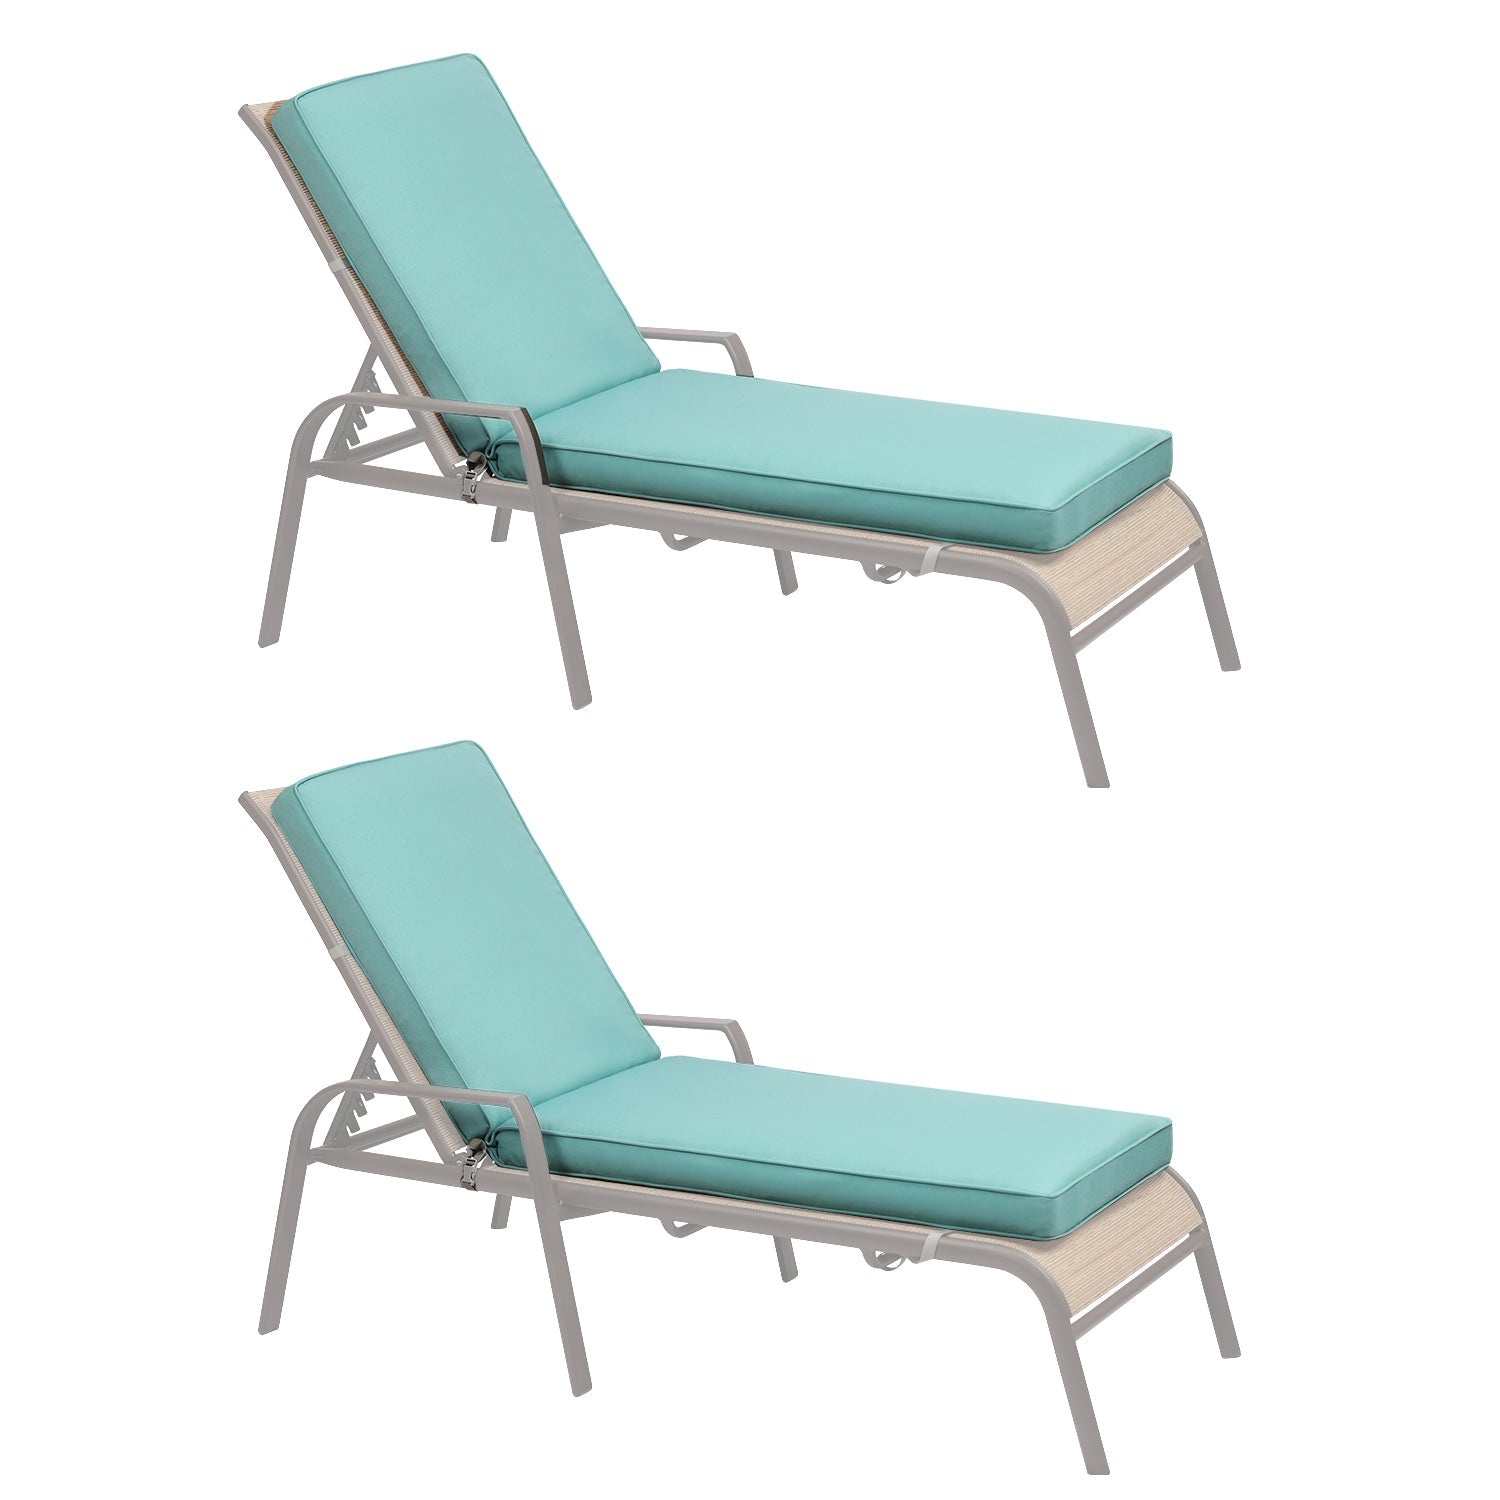 Patio Chaise Lounger Cushions Set of 2, Olefin Fabric, Water-Resistant, 72x21x3 Inches(Only Cushions) CUSHION Aoodor Lake Blue  